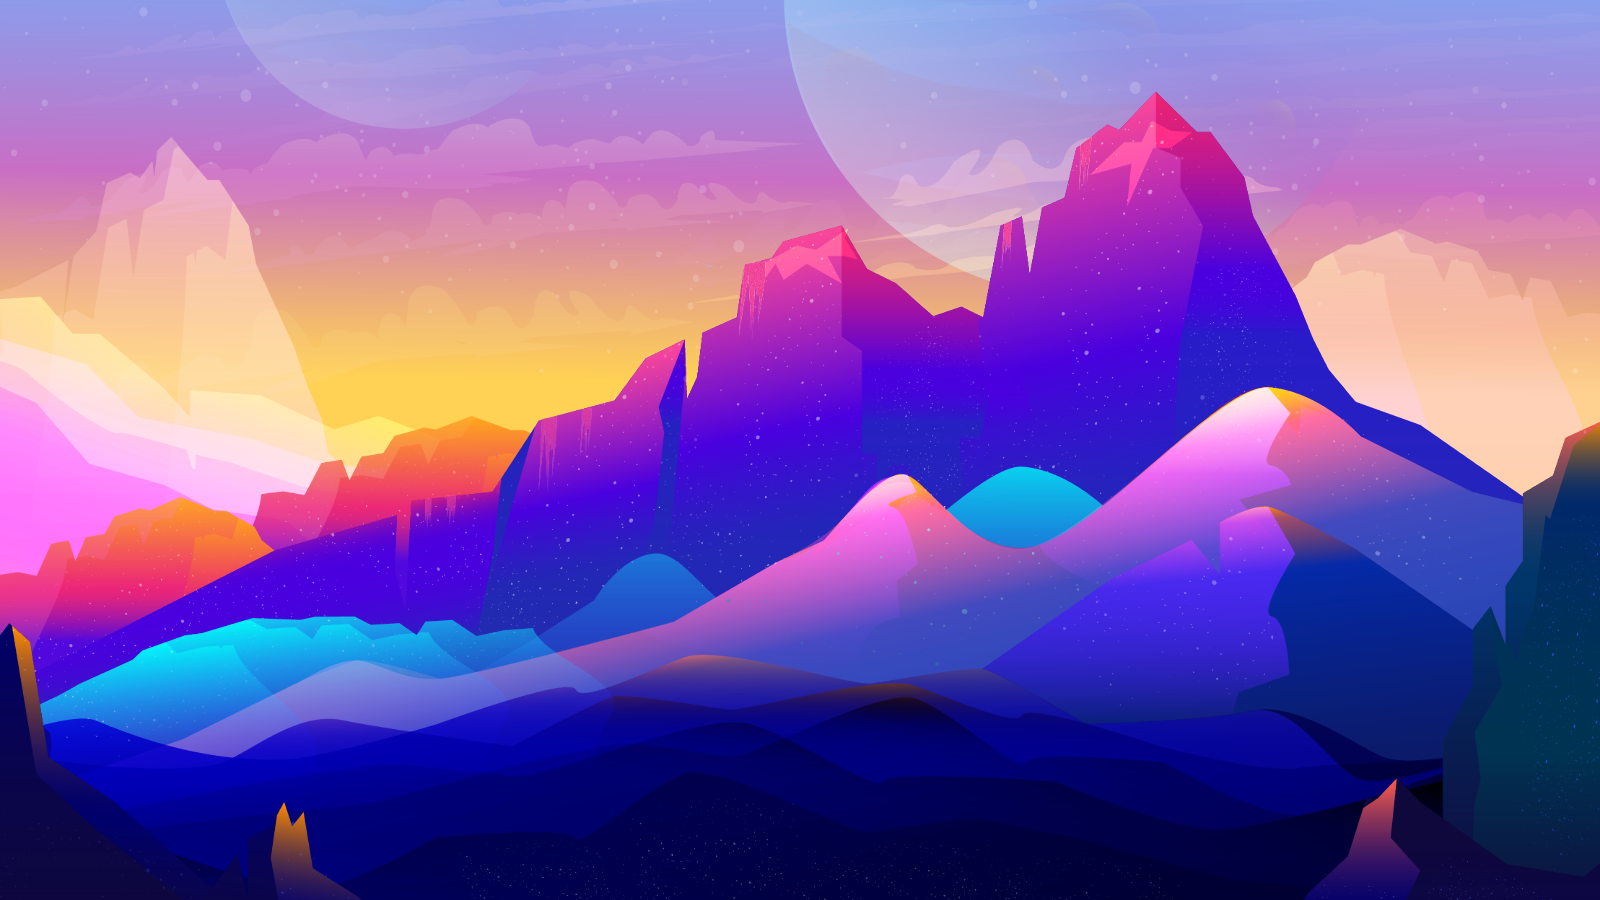 Animated Neon Mountains - Wallpaper Cave